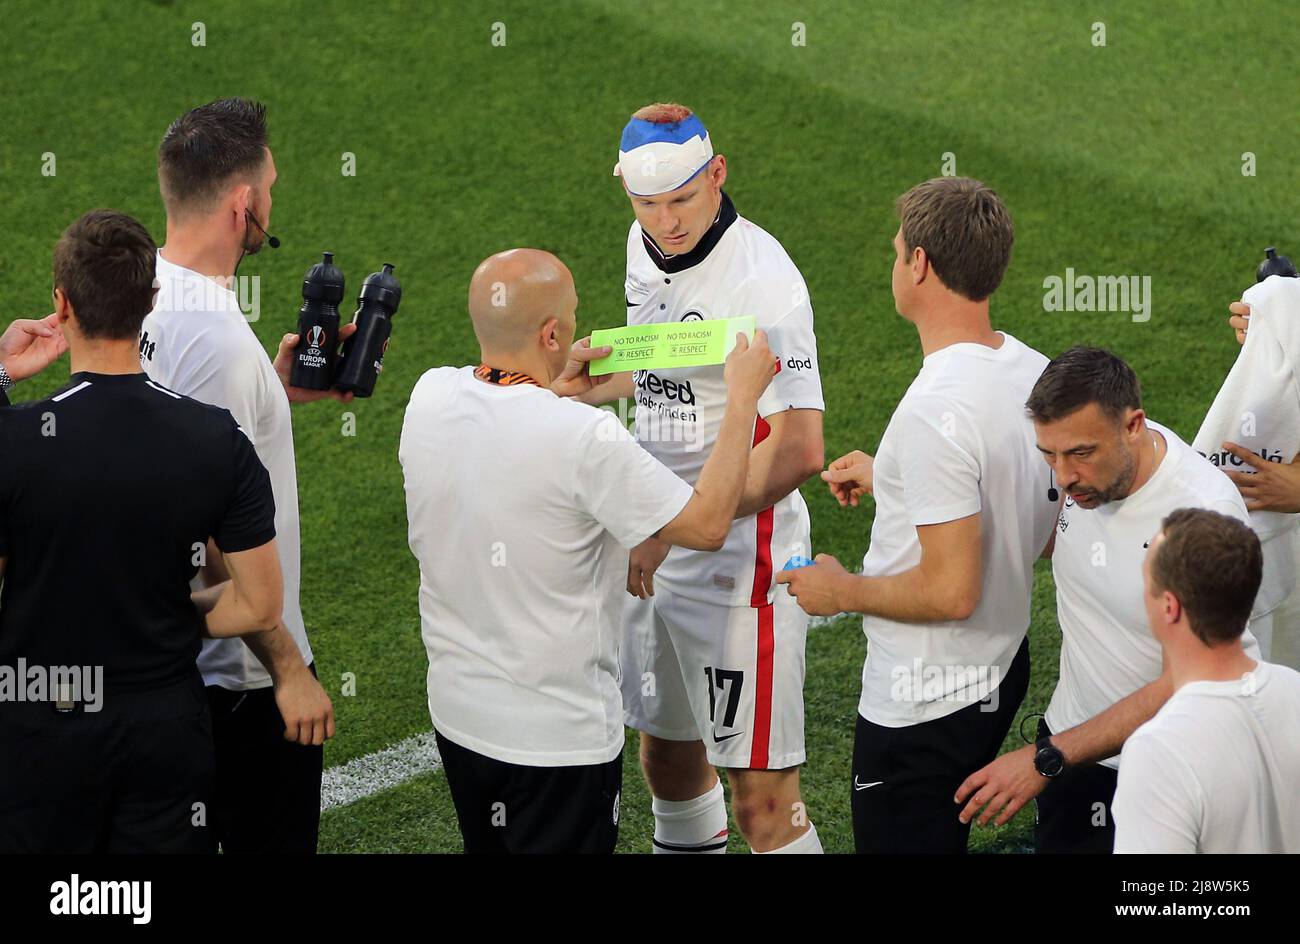 Eintracht Frankfurt's Sebastian Rode picks up an injury and receives treatment during the UEFA Europa League Final at the Estadio Ramon Sanchez-Pizjuan, Seville. Picture date: Wednesday May 18, 2022. Stock Photo